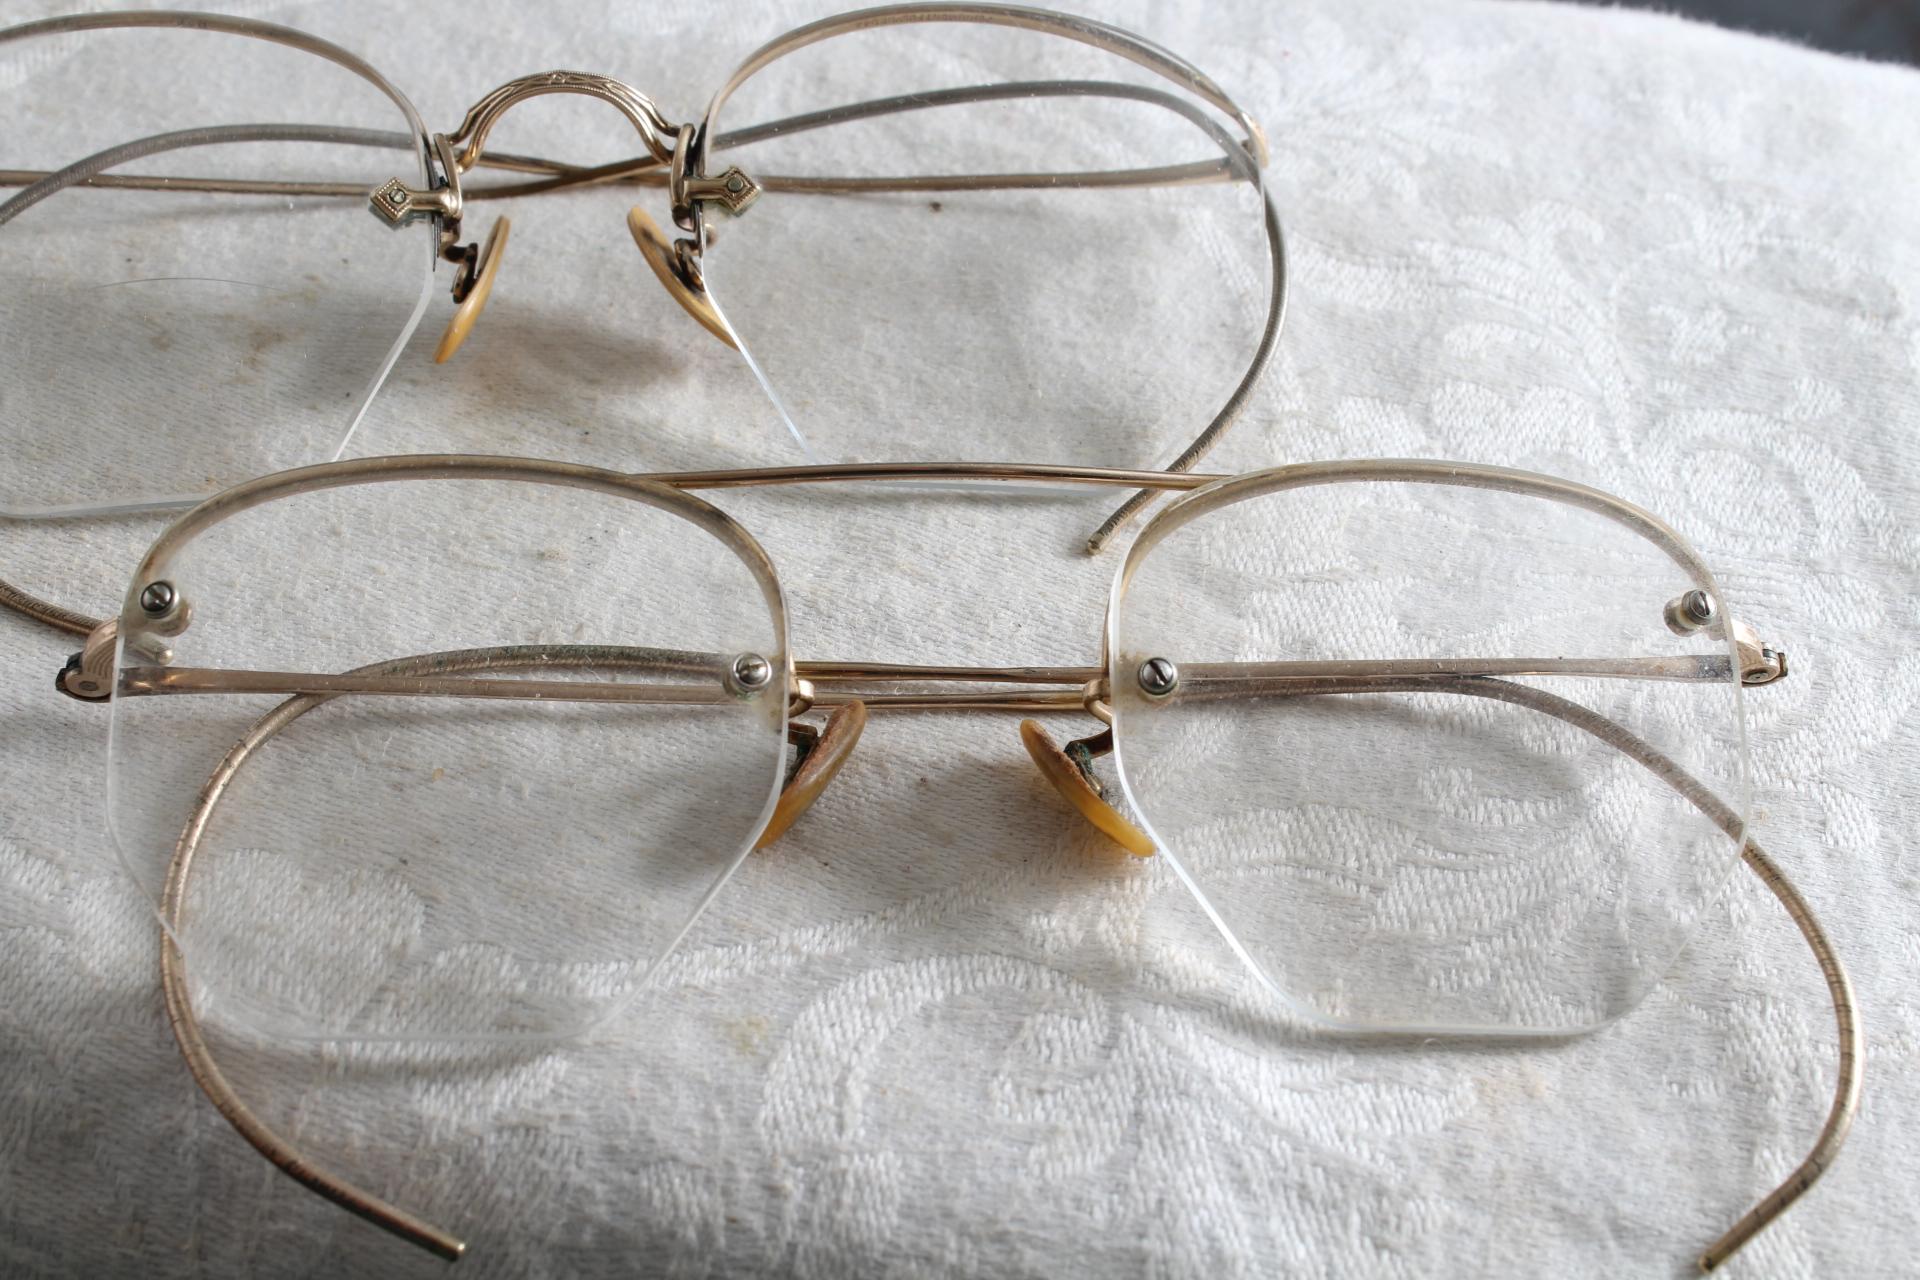 2 Pair of 12kt Gold Filled Antique Eyeglasses SHURON in Good Condition